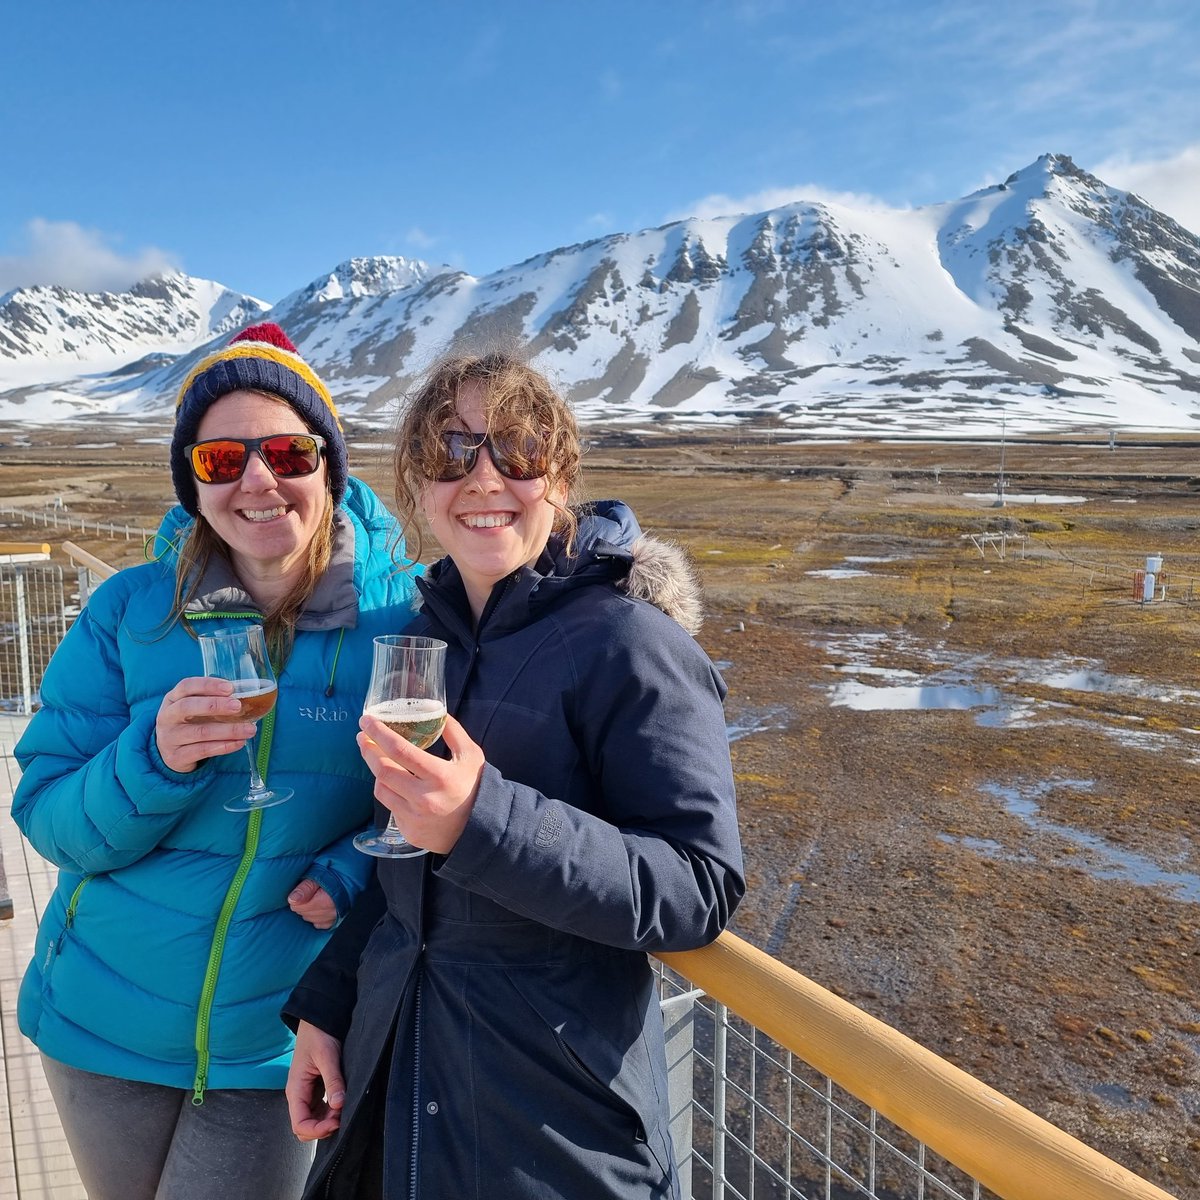 It's happening! With @tash_gillies 7 #ATLAS receiver stations and 22 tags out in kittiwake & guillemots in #Svalbard and as of today, we are detecting tagged birds! @DrCBeardsworth @ran_nathan @sivan_toledo. Read more about the technology here science.org/doi/full/10.11. Champagne!